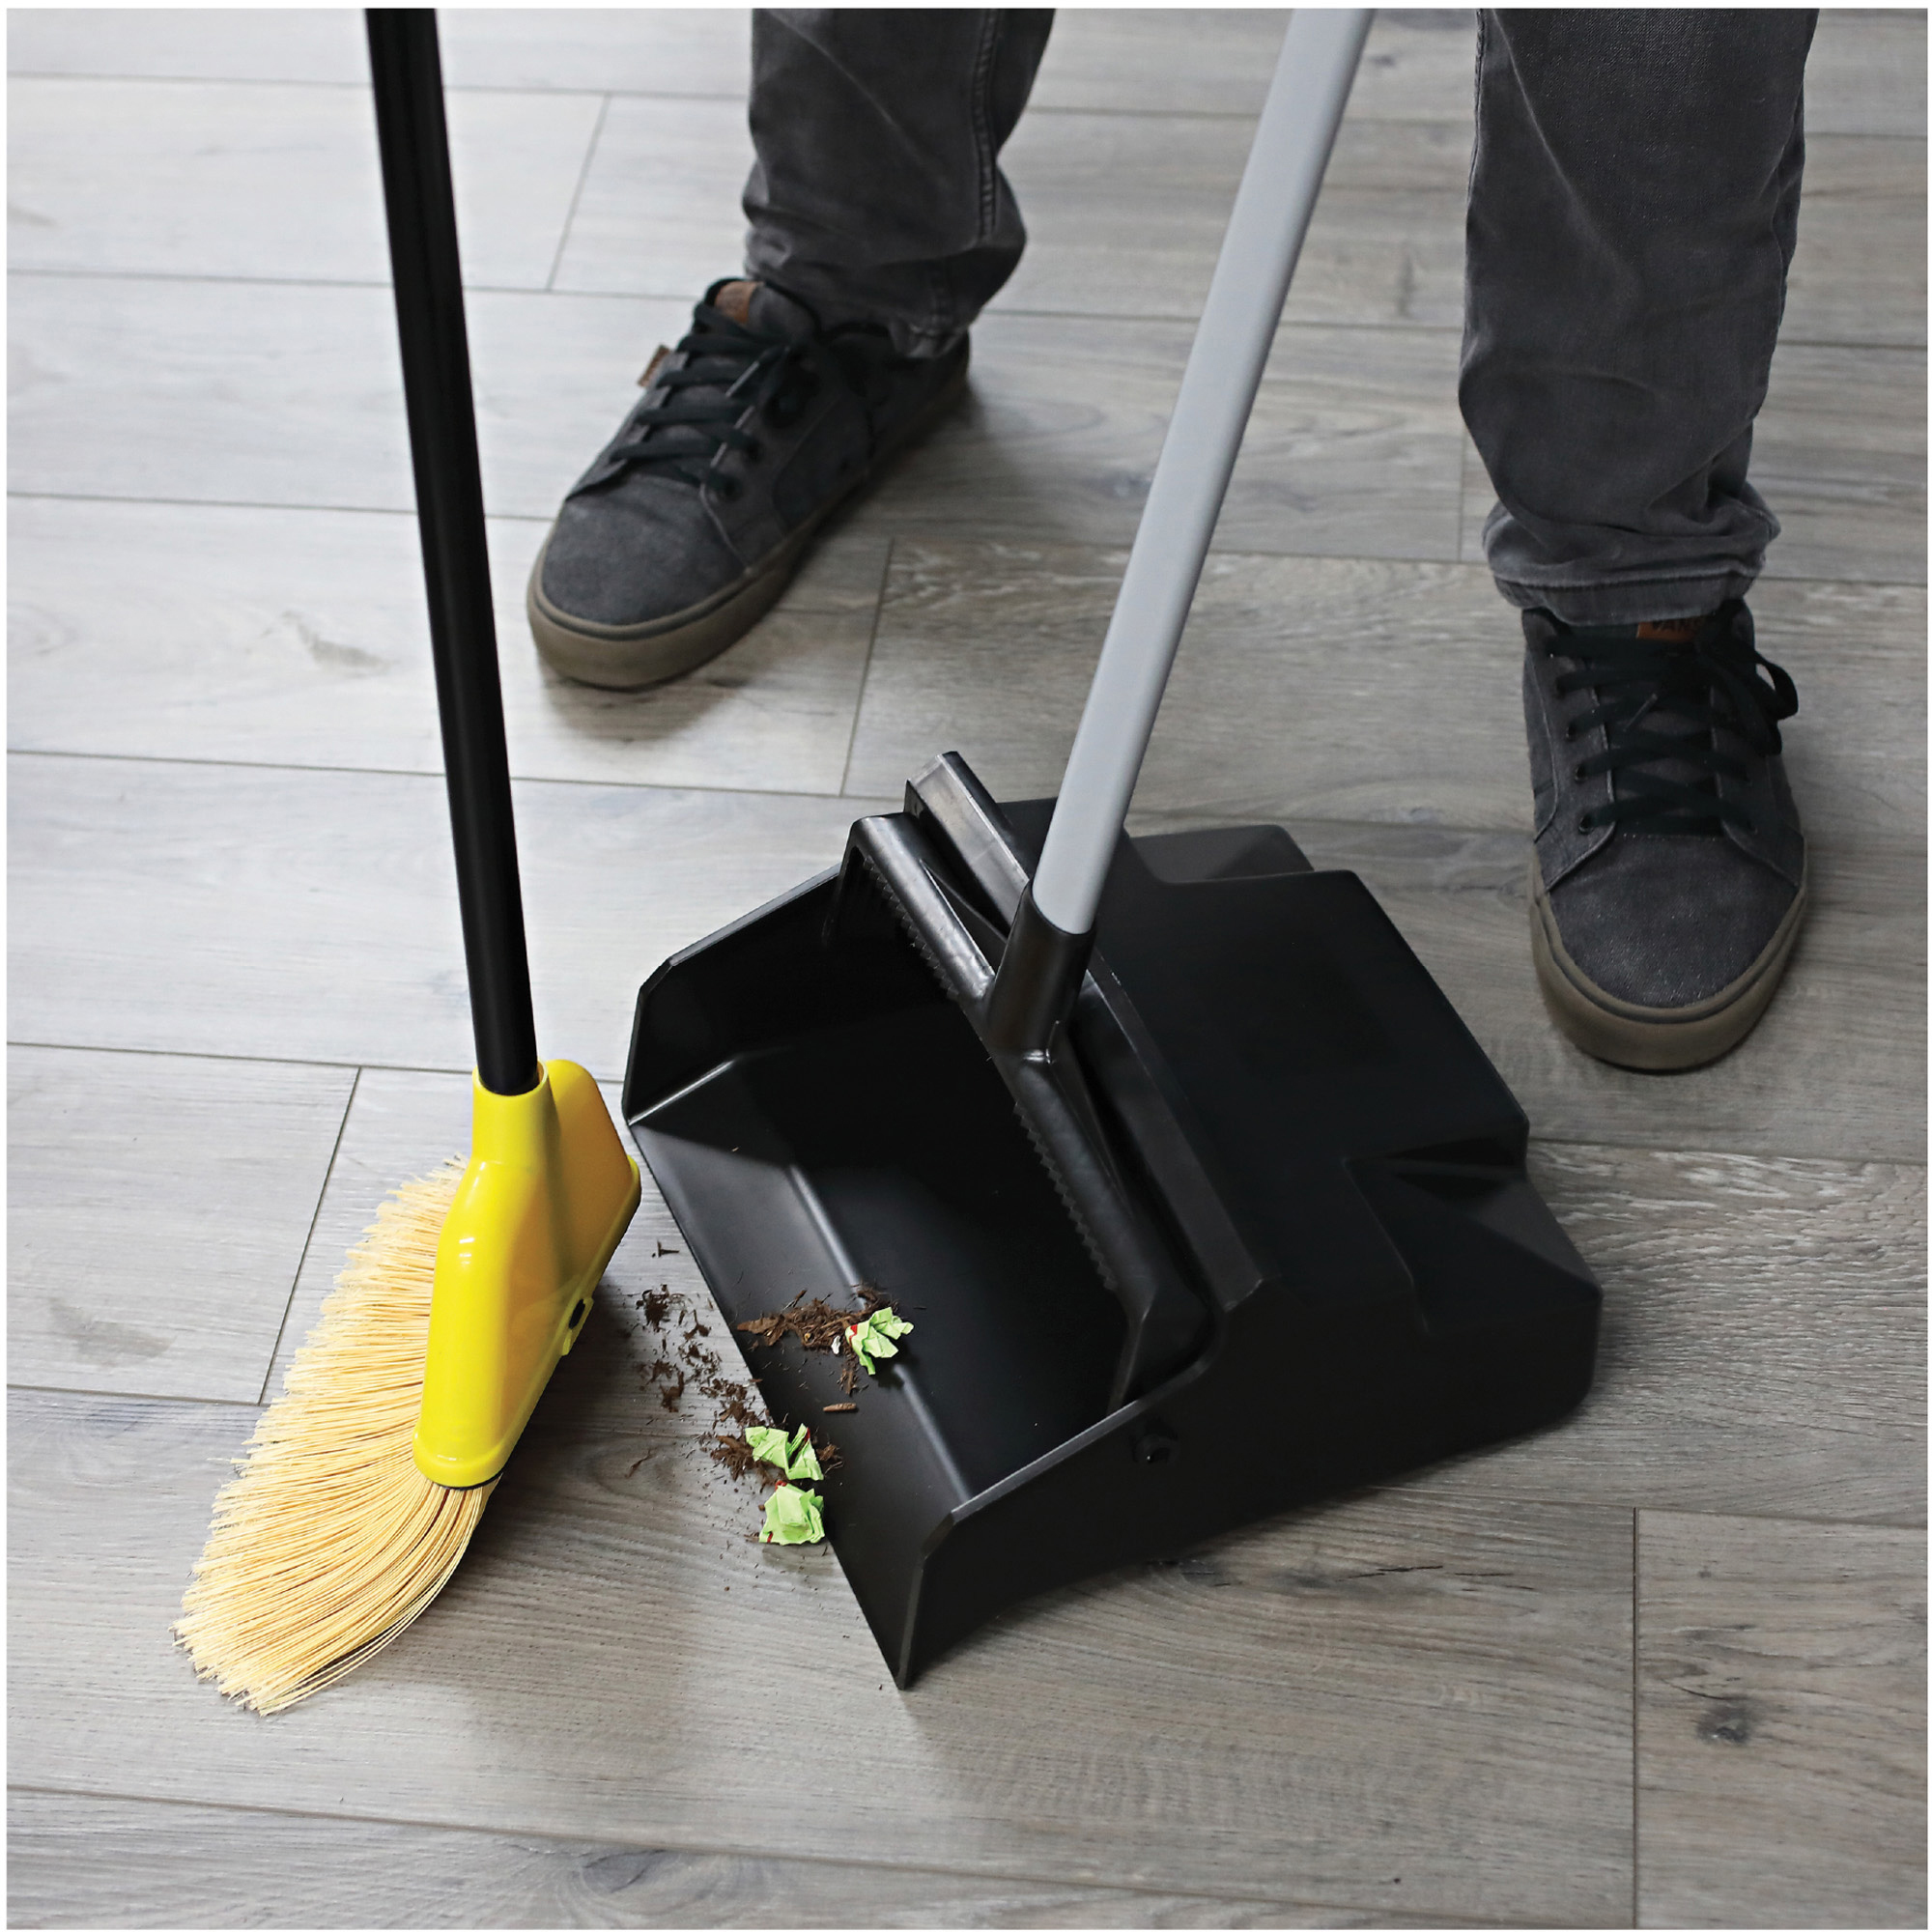 12 Lobby Dust Pan with Wheels - Free Standing Dust Pan